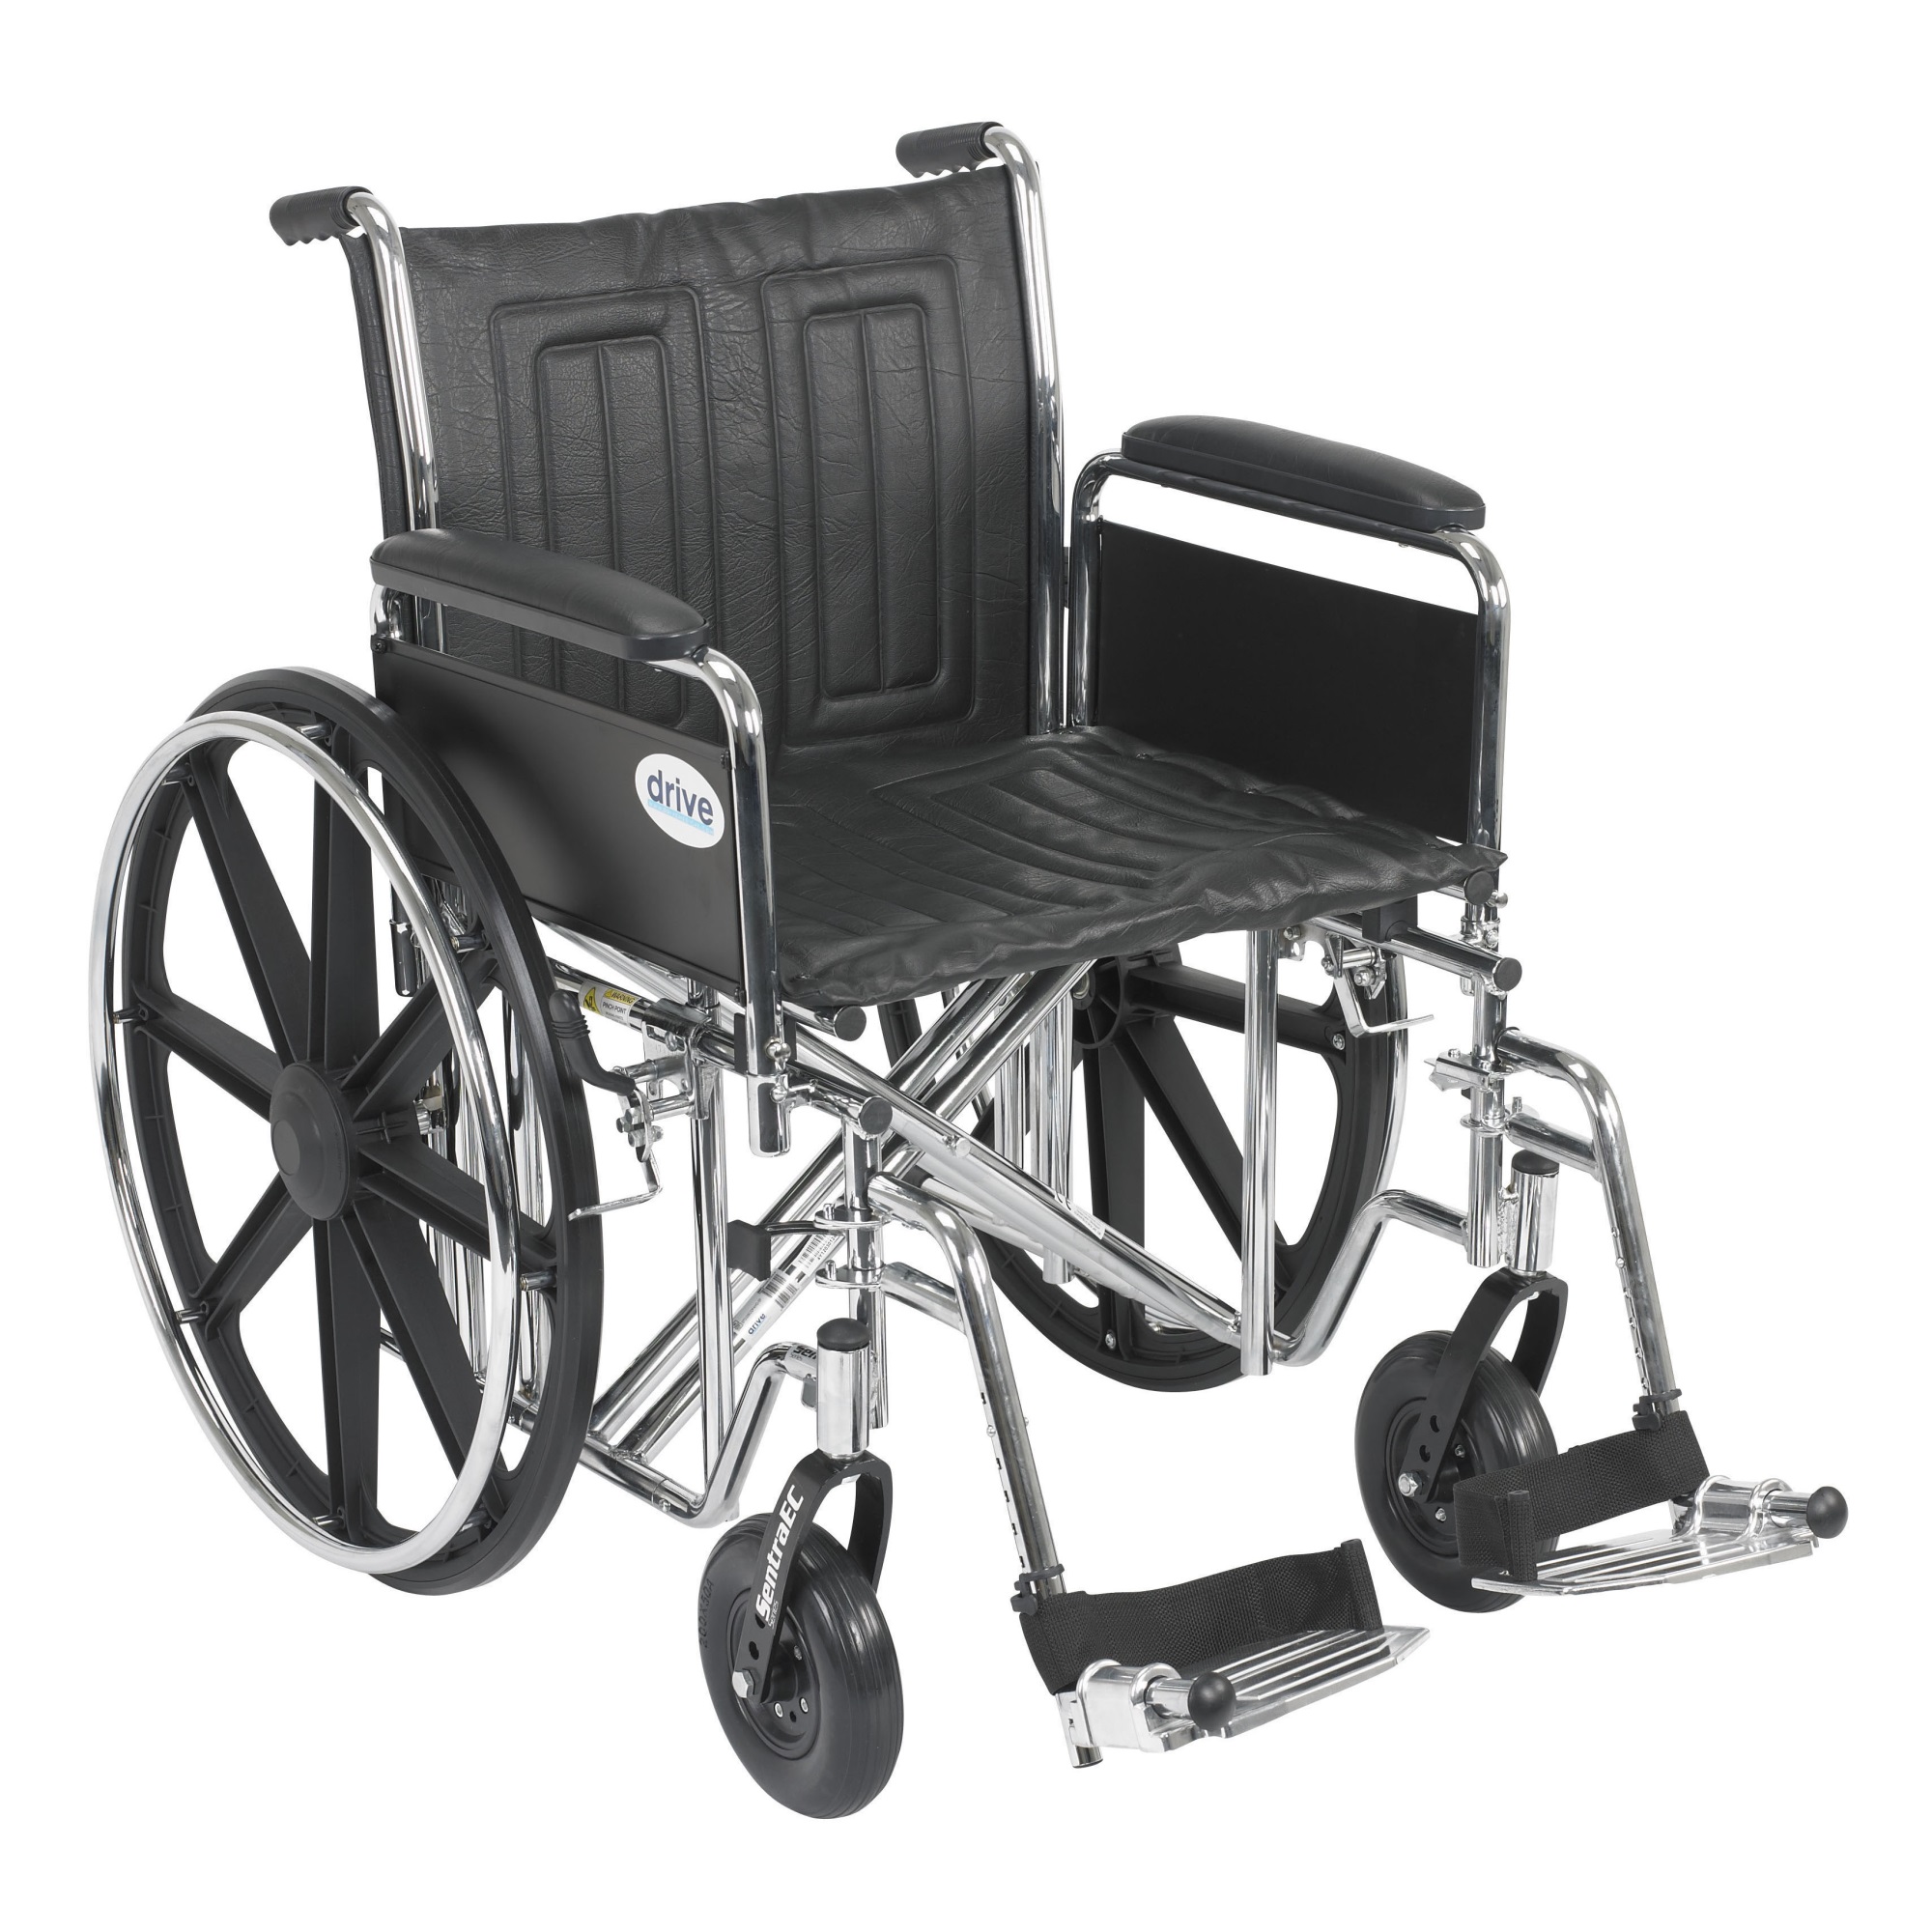 Drive DeVilbiss Healthcare Sentra EC Heavy Duty Wheelchair, Detachable Full Arms, Swing away Footrests, 20" Seat